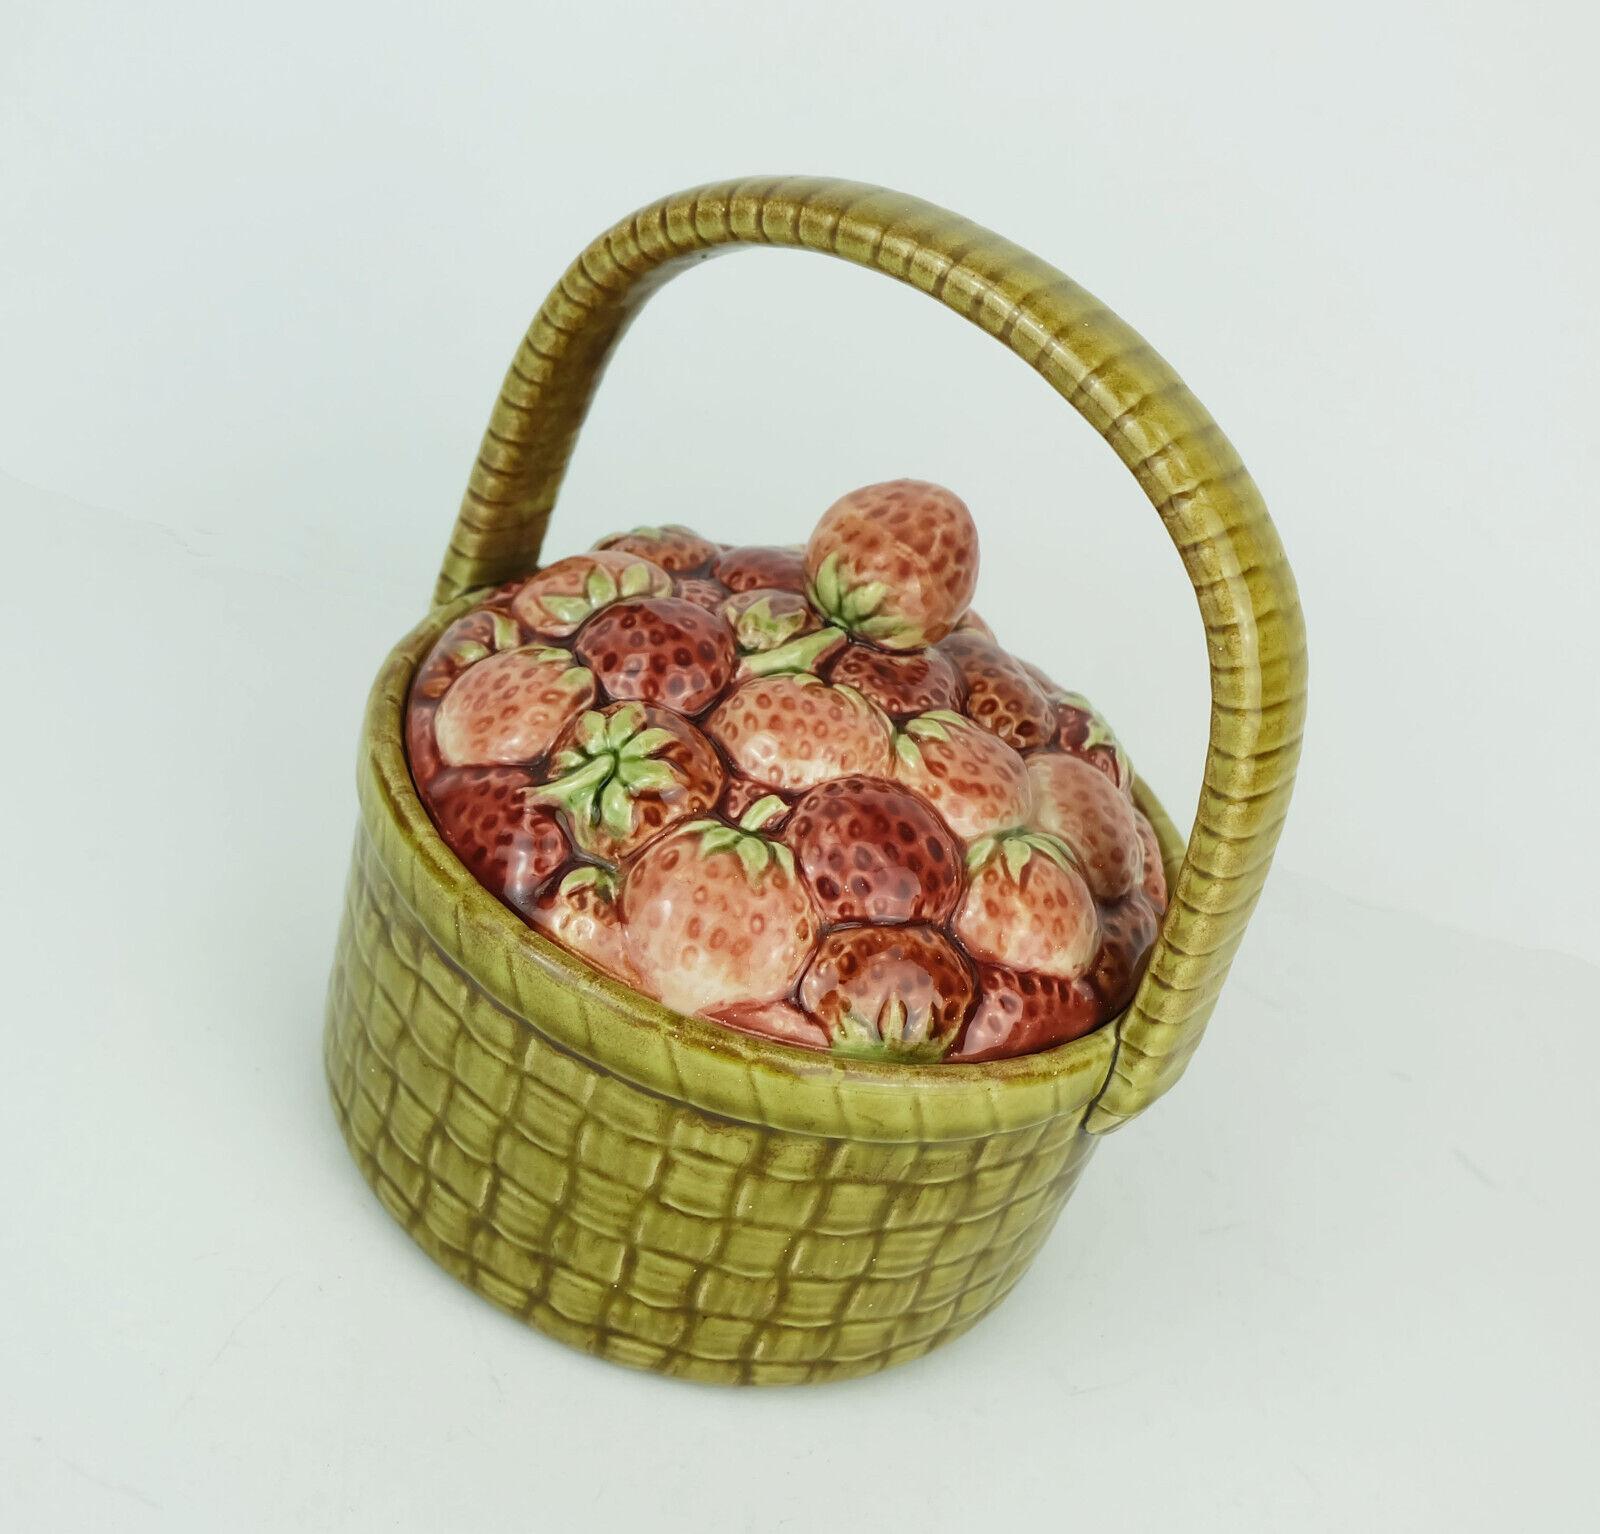 Very beautiful lidded ceramic jar, Sarreguemines France, around 1920s. Pot with basket surface, lid with strawberry decor.

Dimensions in cm: 
Height measured from bottom to rim 8,5 cm, total height with handle 20 cm, width 17 cm, depth 15